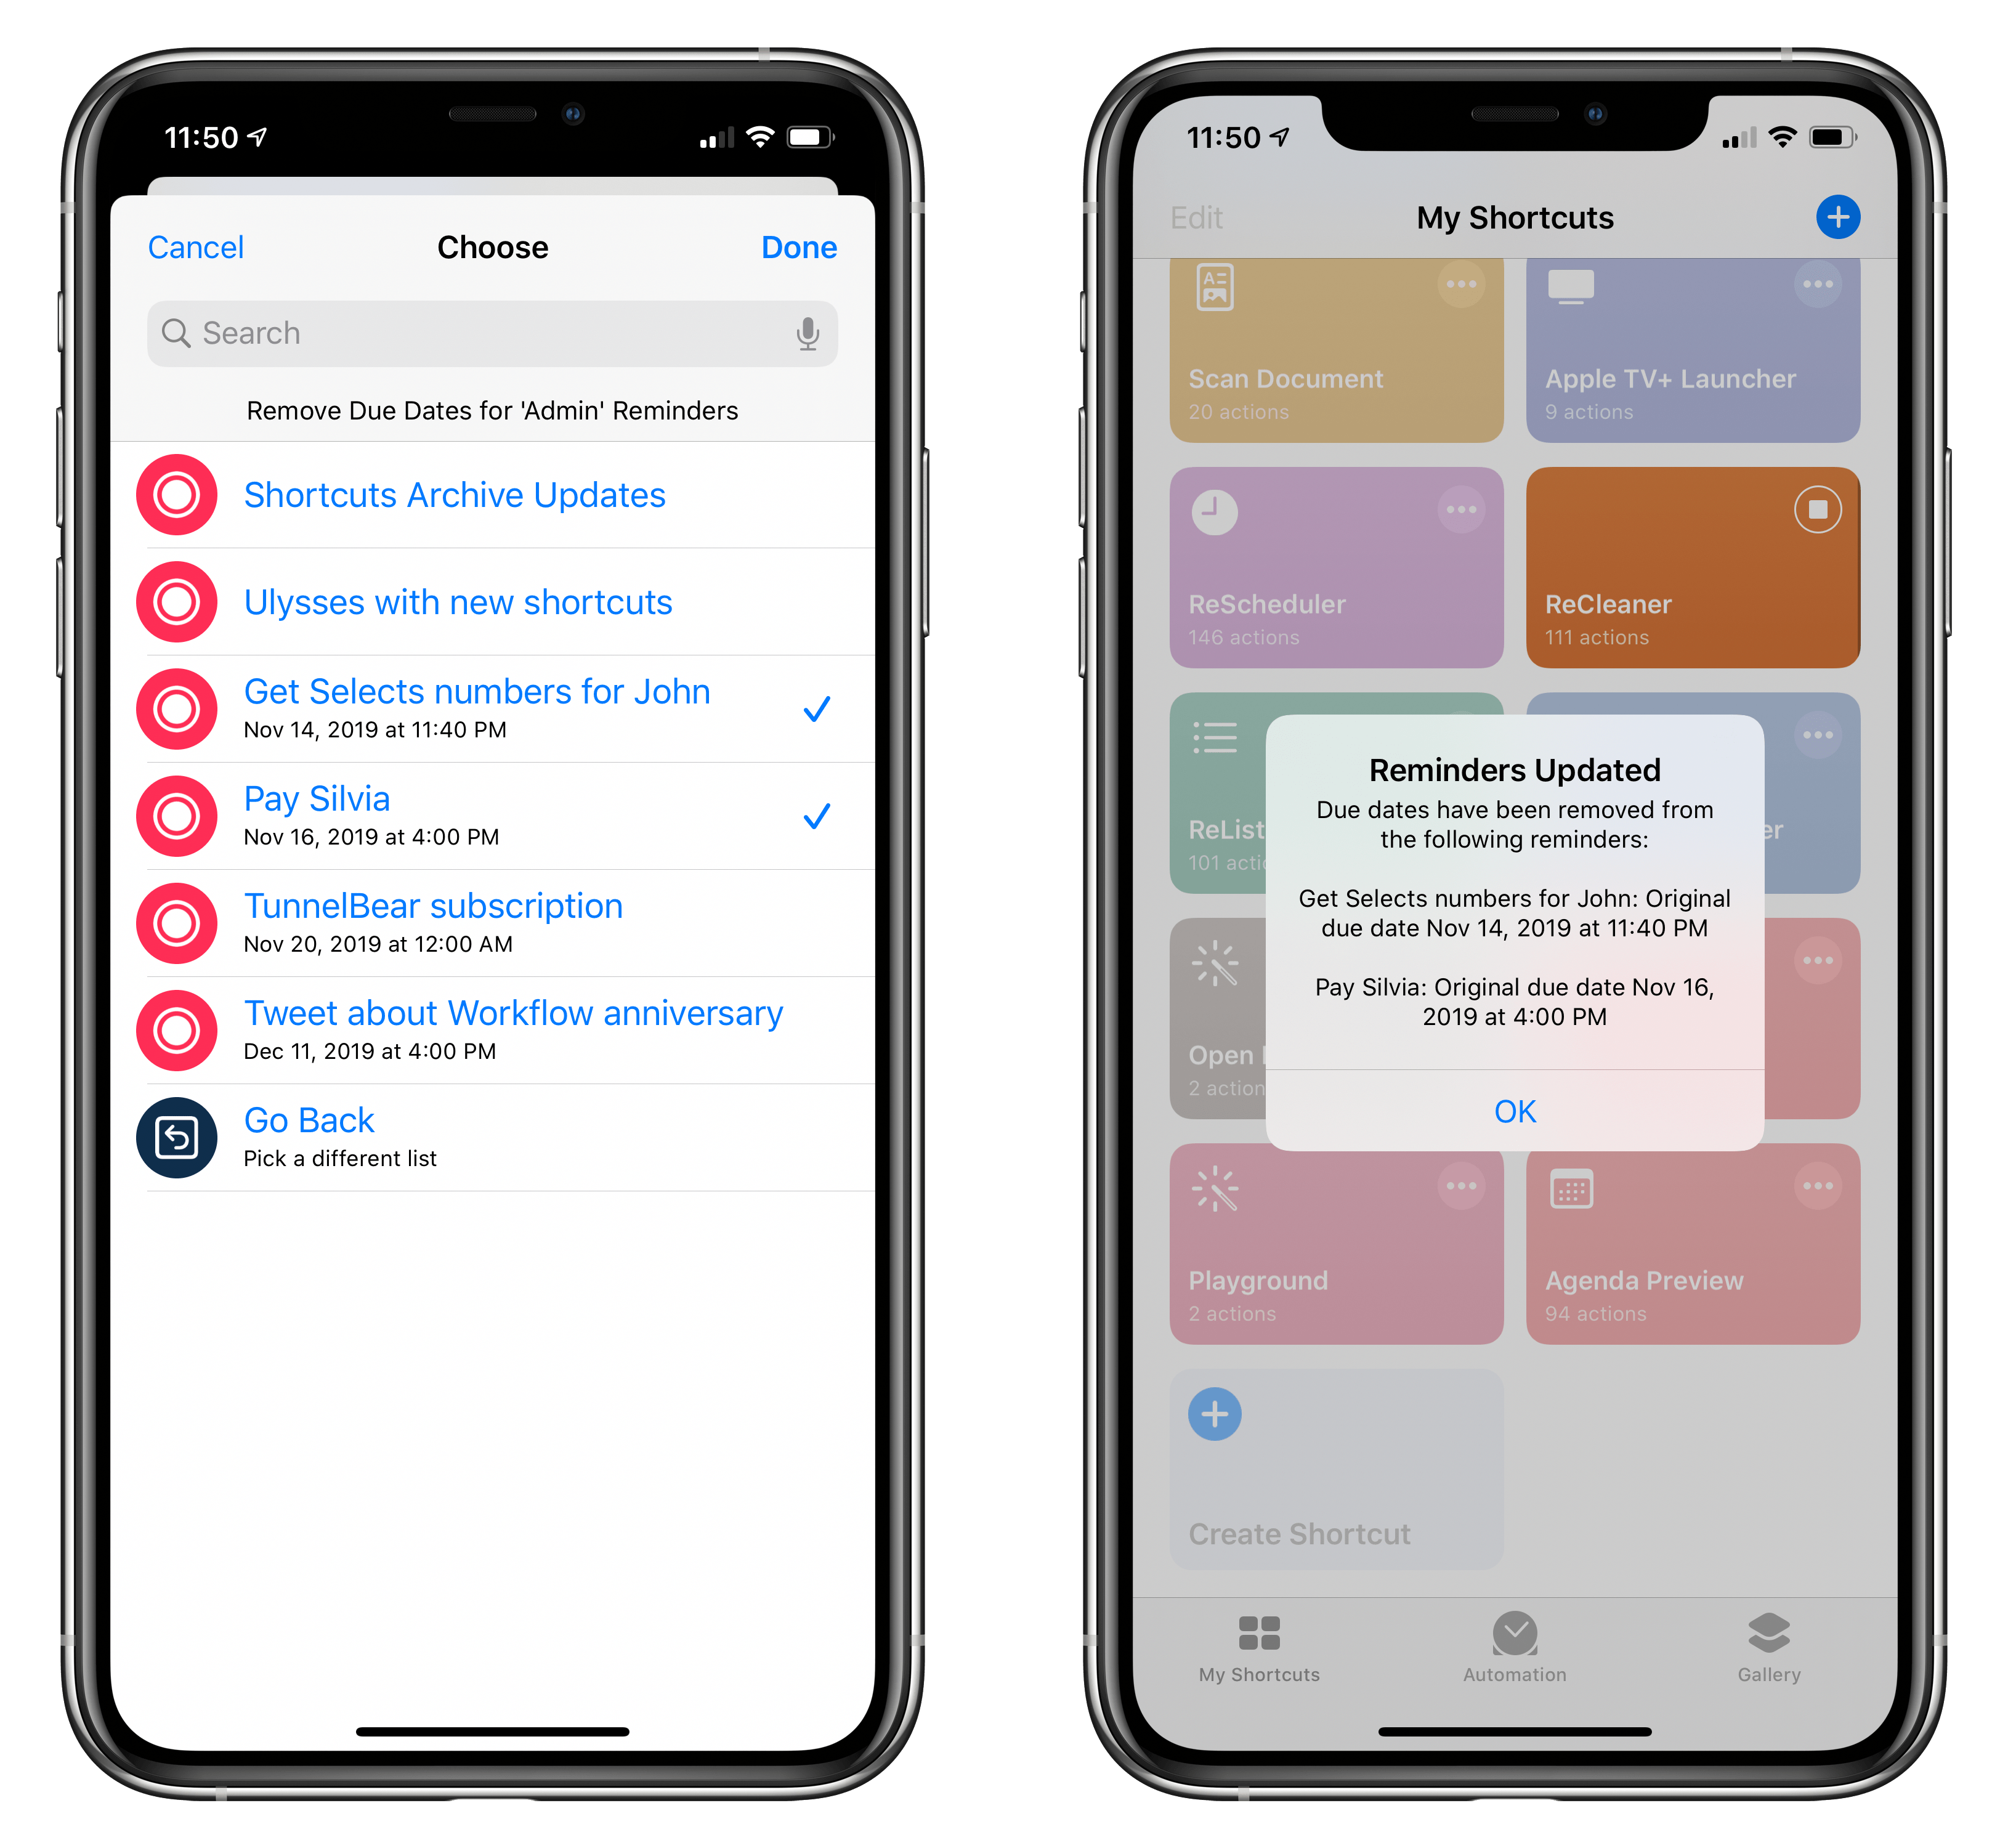 Removing due dates from multiple reminders at once.